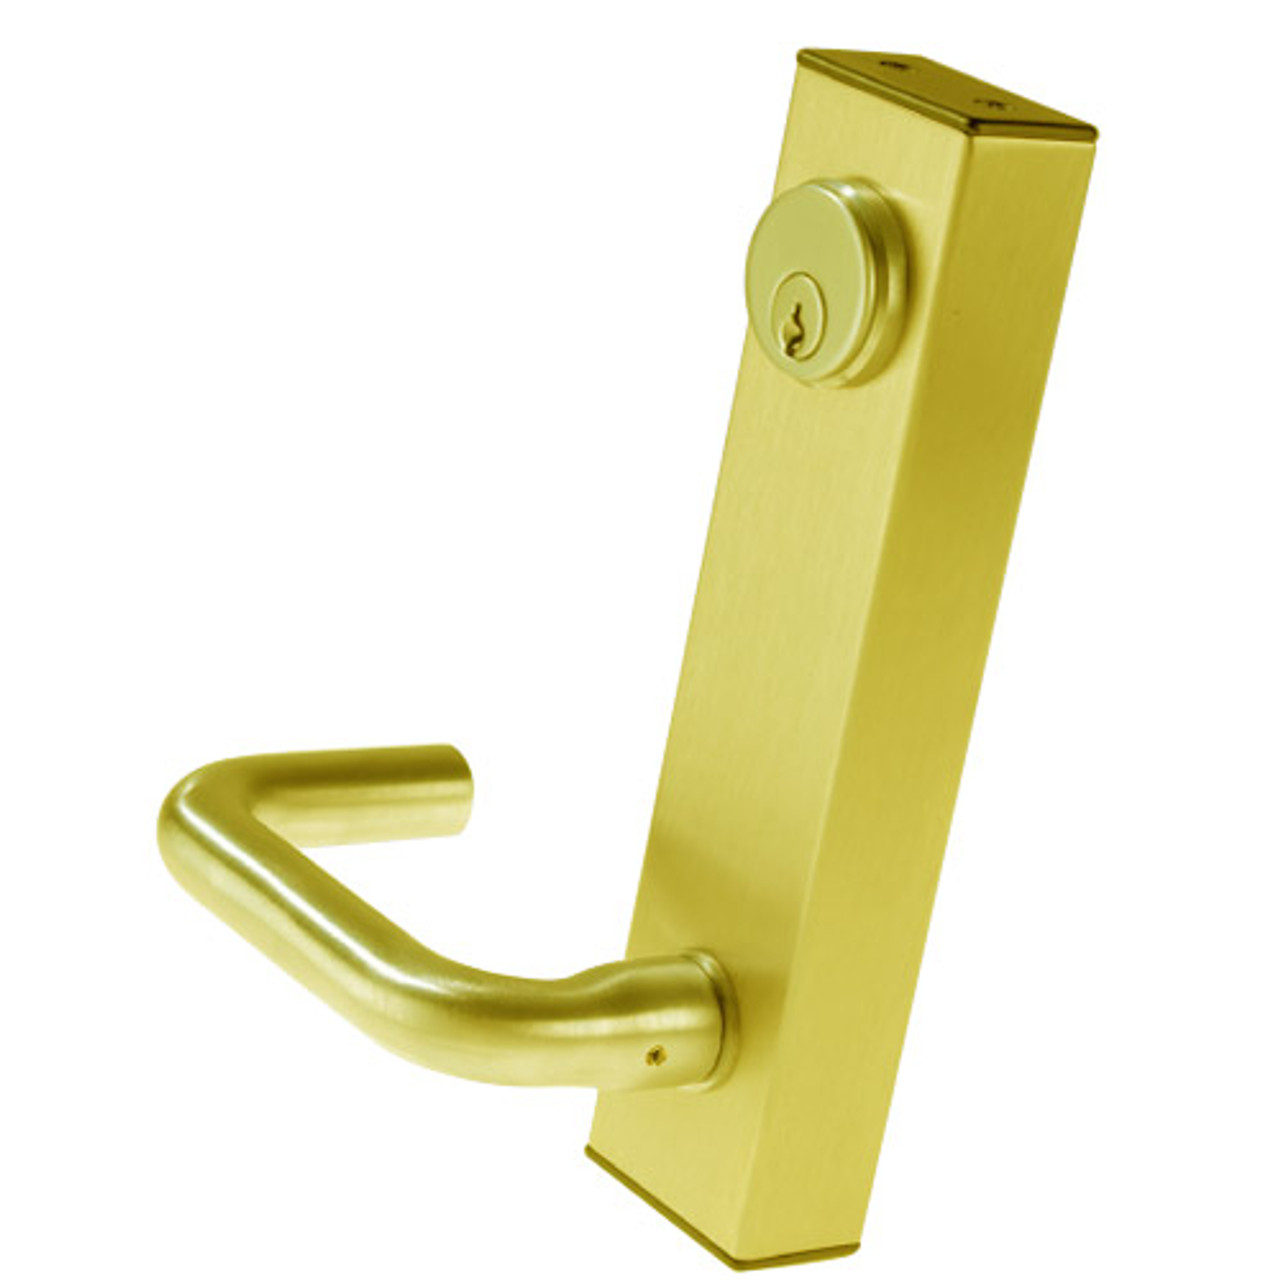 3080E-02-0-37-30 US3 Adams Rite Electrified Entry Trim with Round Lever in Bright Brass Finish